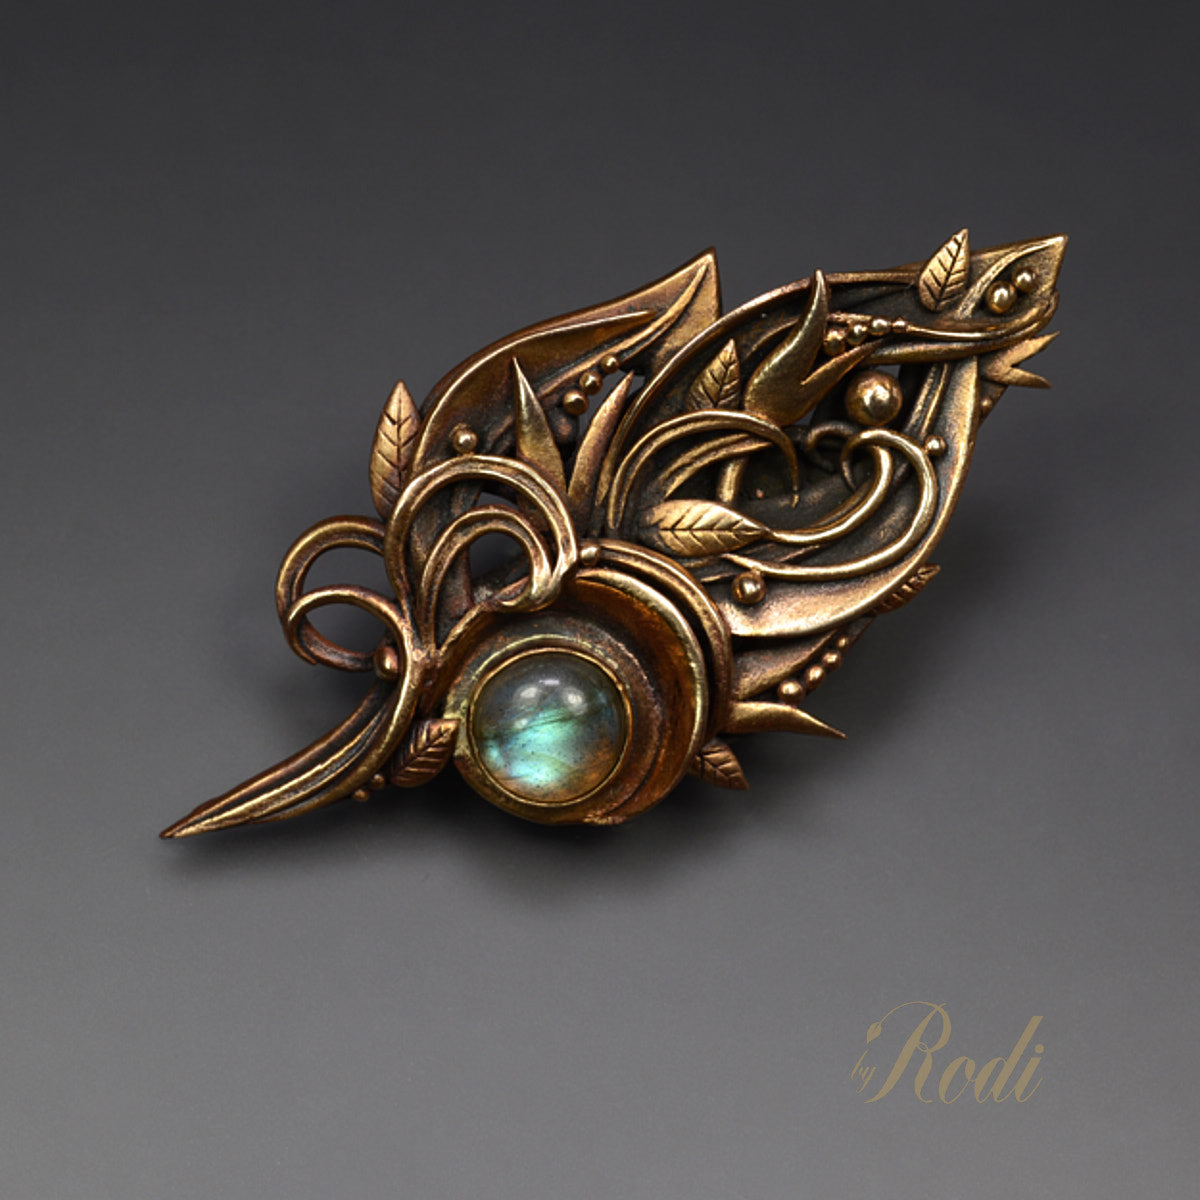 Beguiled - Bronze Brooch / Pin With Labradorite Gemstone